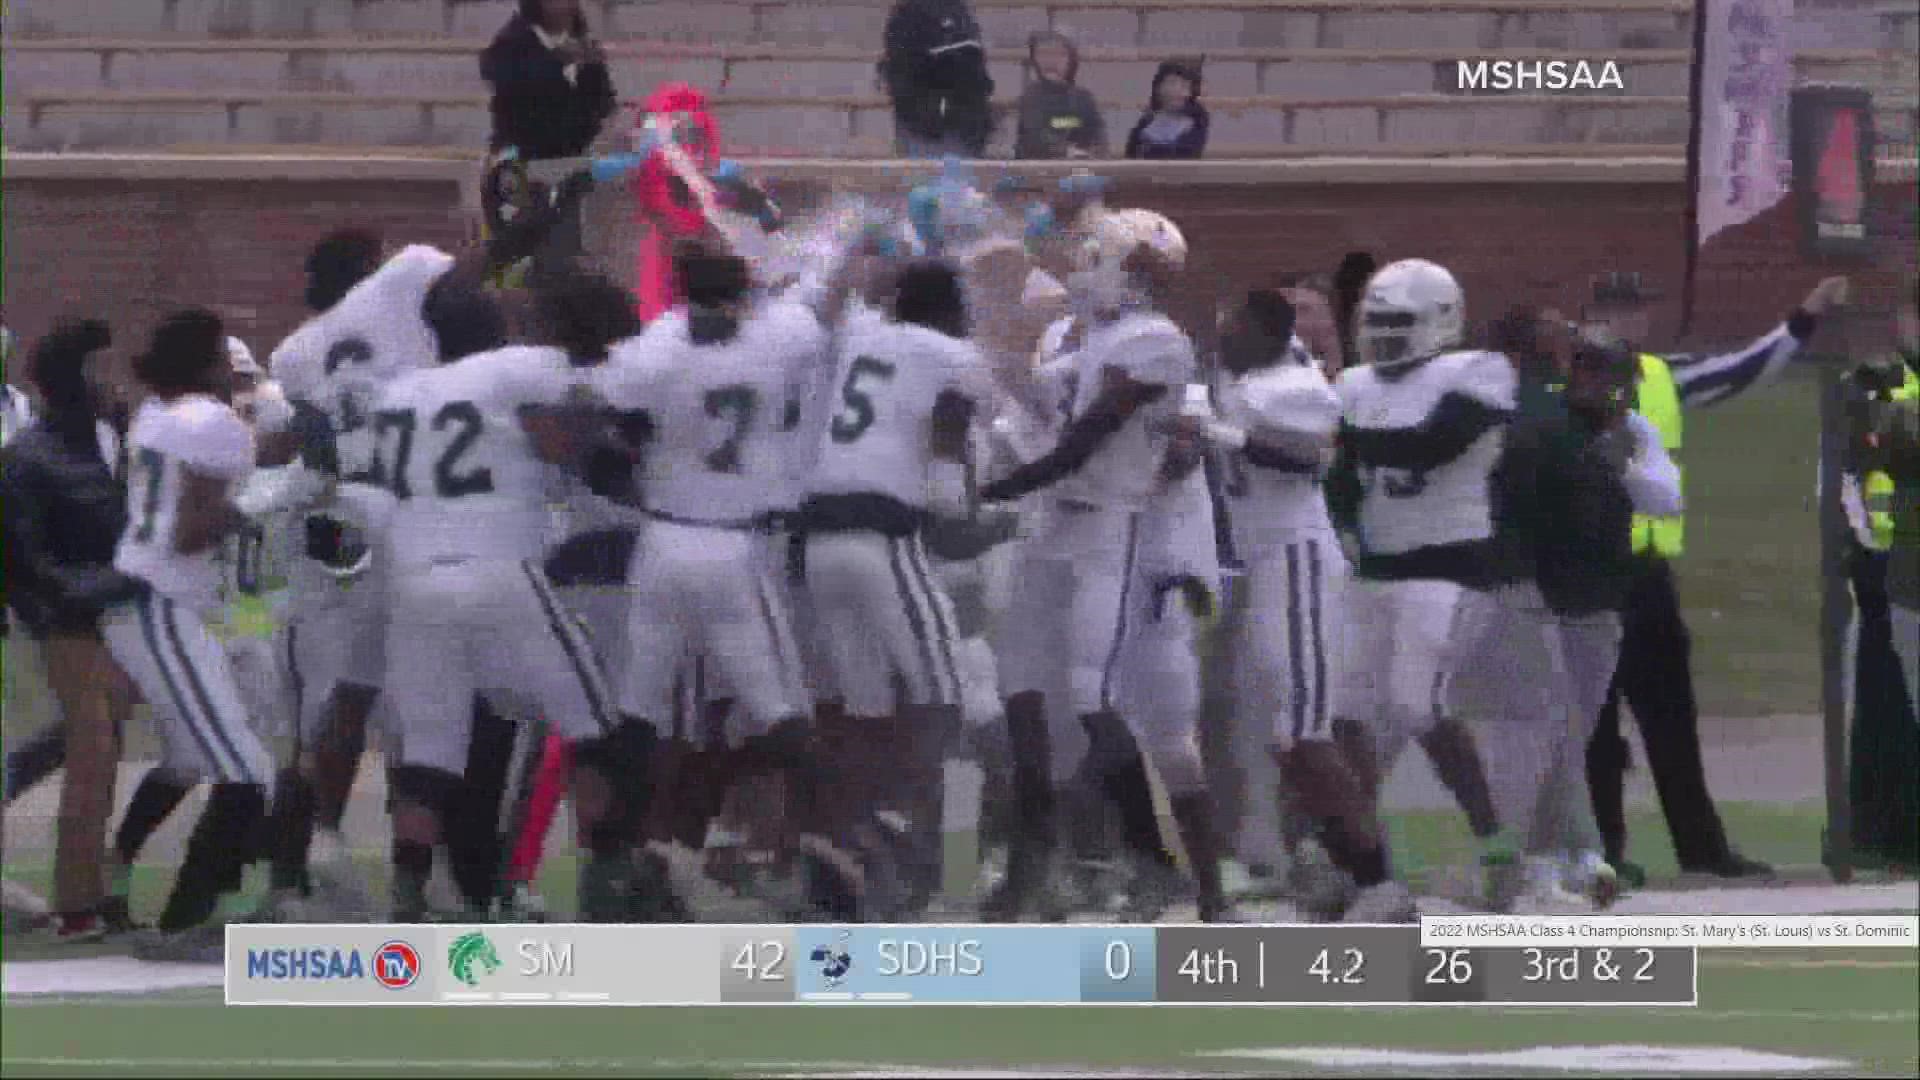 They claimed the Class 4 title by beating St. Dominic 42-0 at Faust Field on The University of Missouri's campus Friday. They won back-to-back titles.